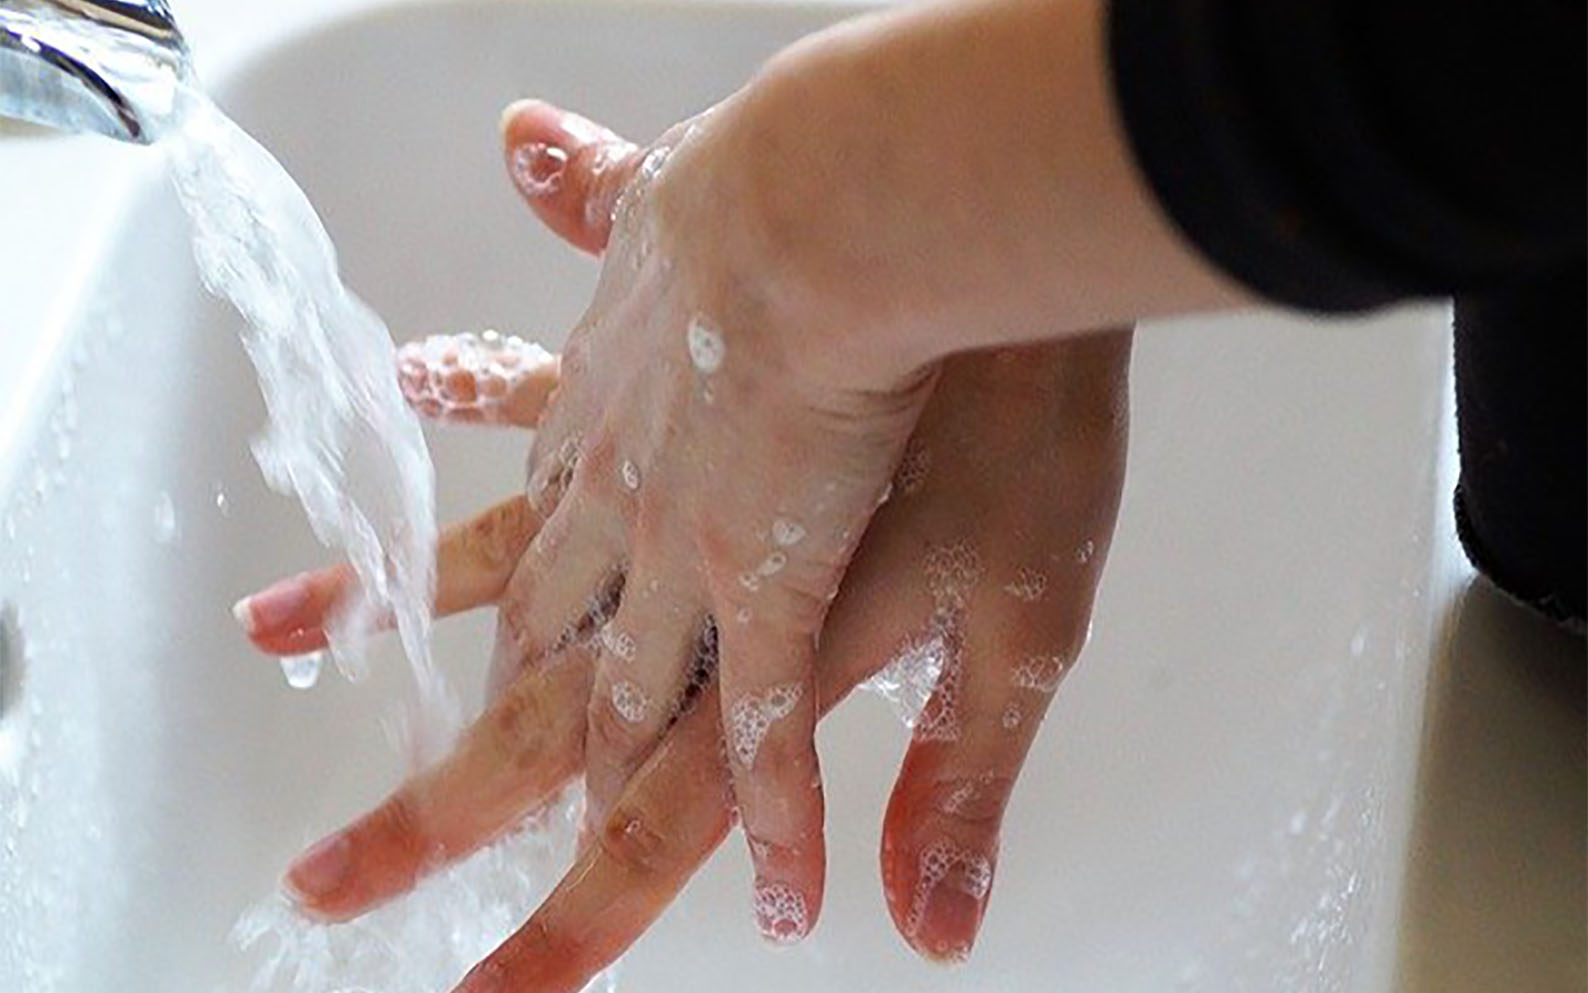 Image for Not even a global pandemic can stop poor hand hygiene, Curtin study finds